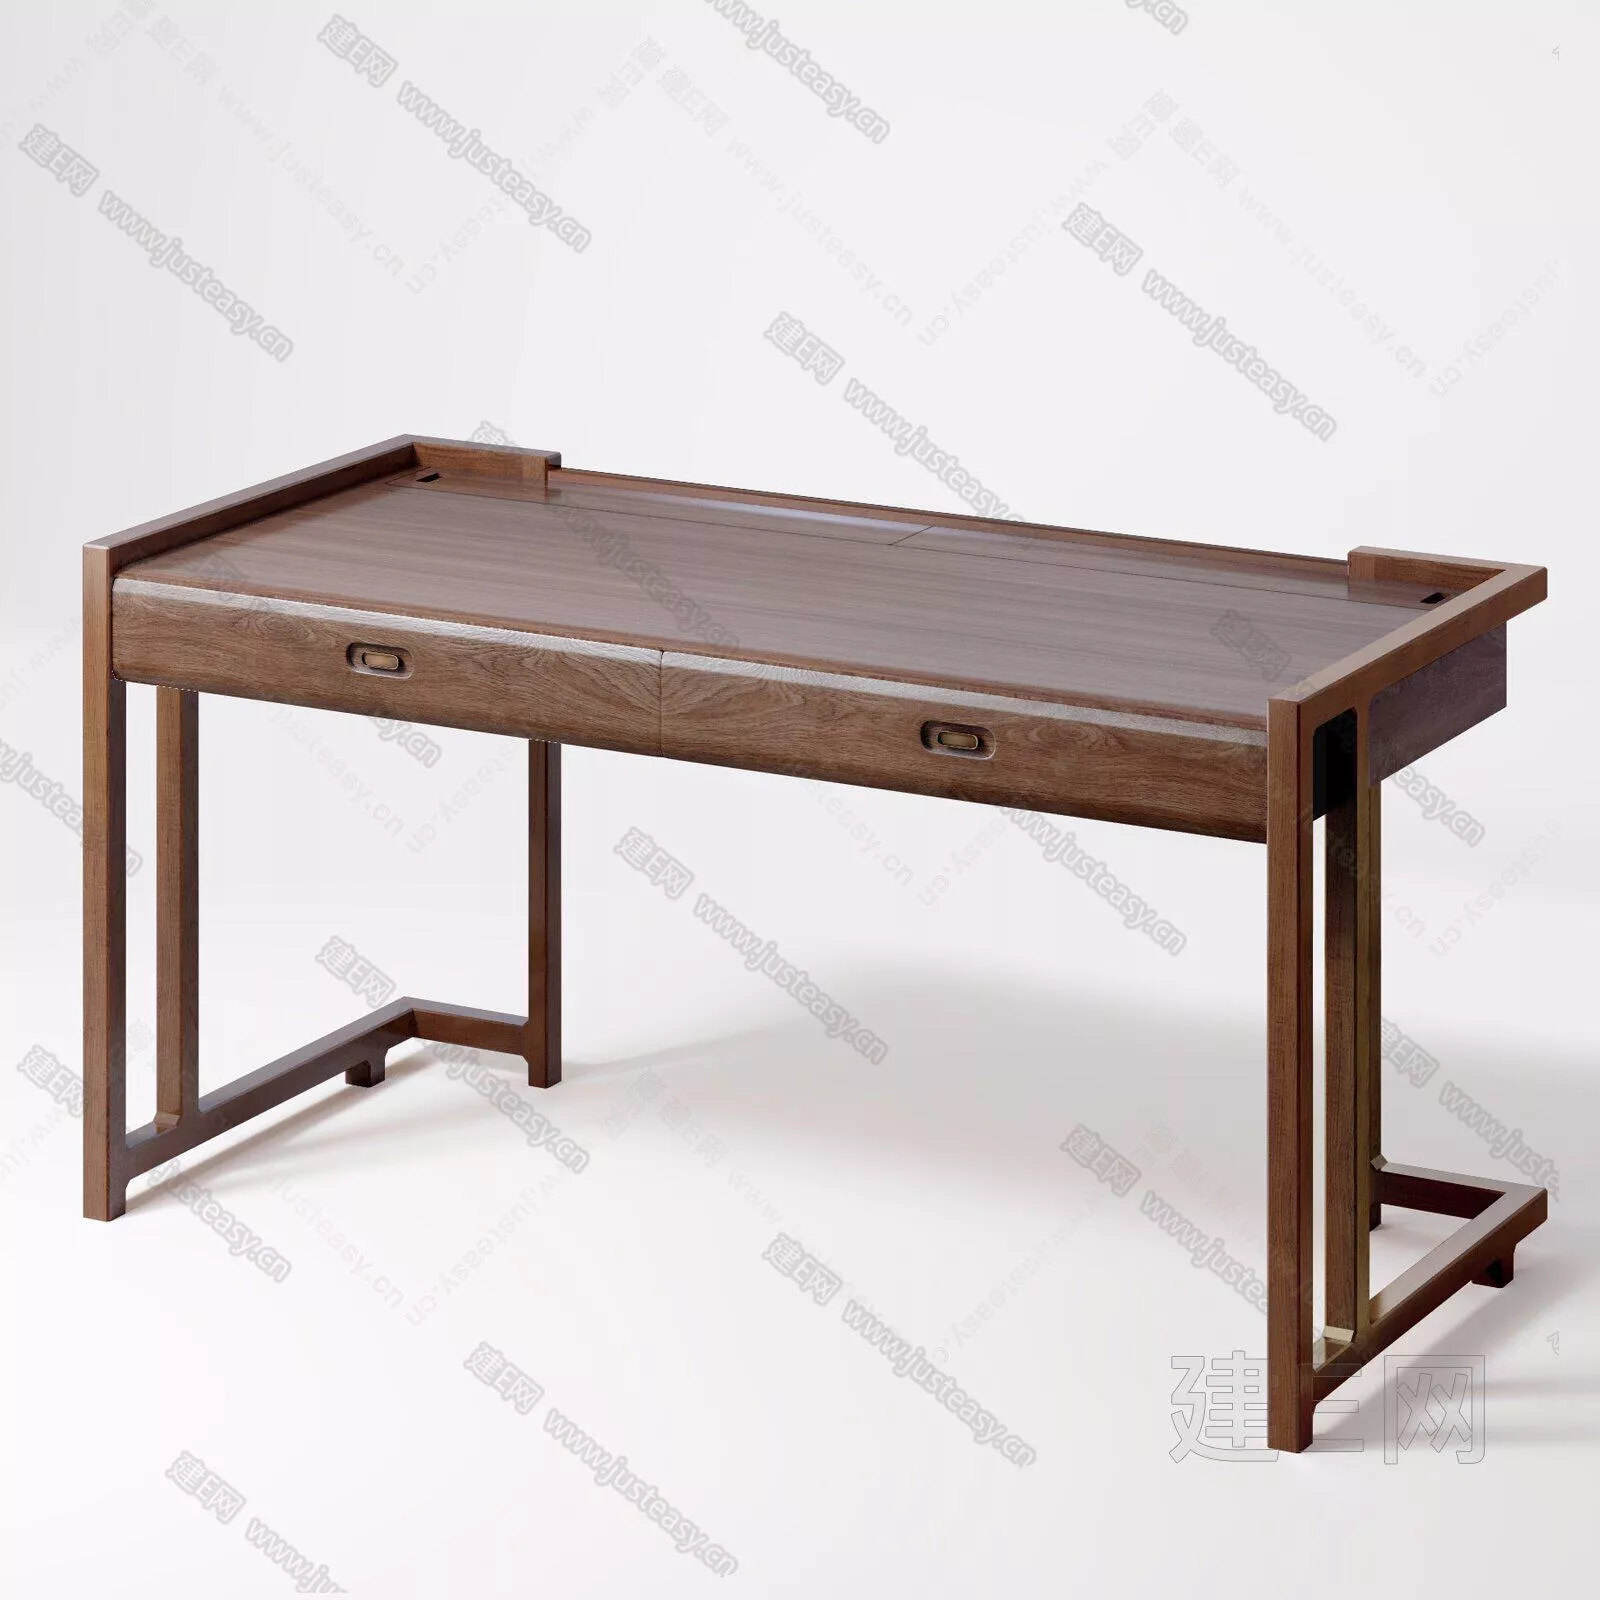 CHINESE DINING TABLE SET - SKETCHUP 3D MODEL - ENSCAPE - 111169004